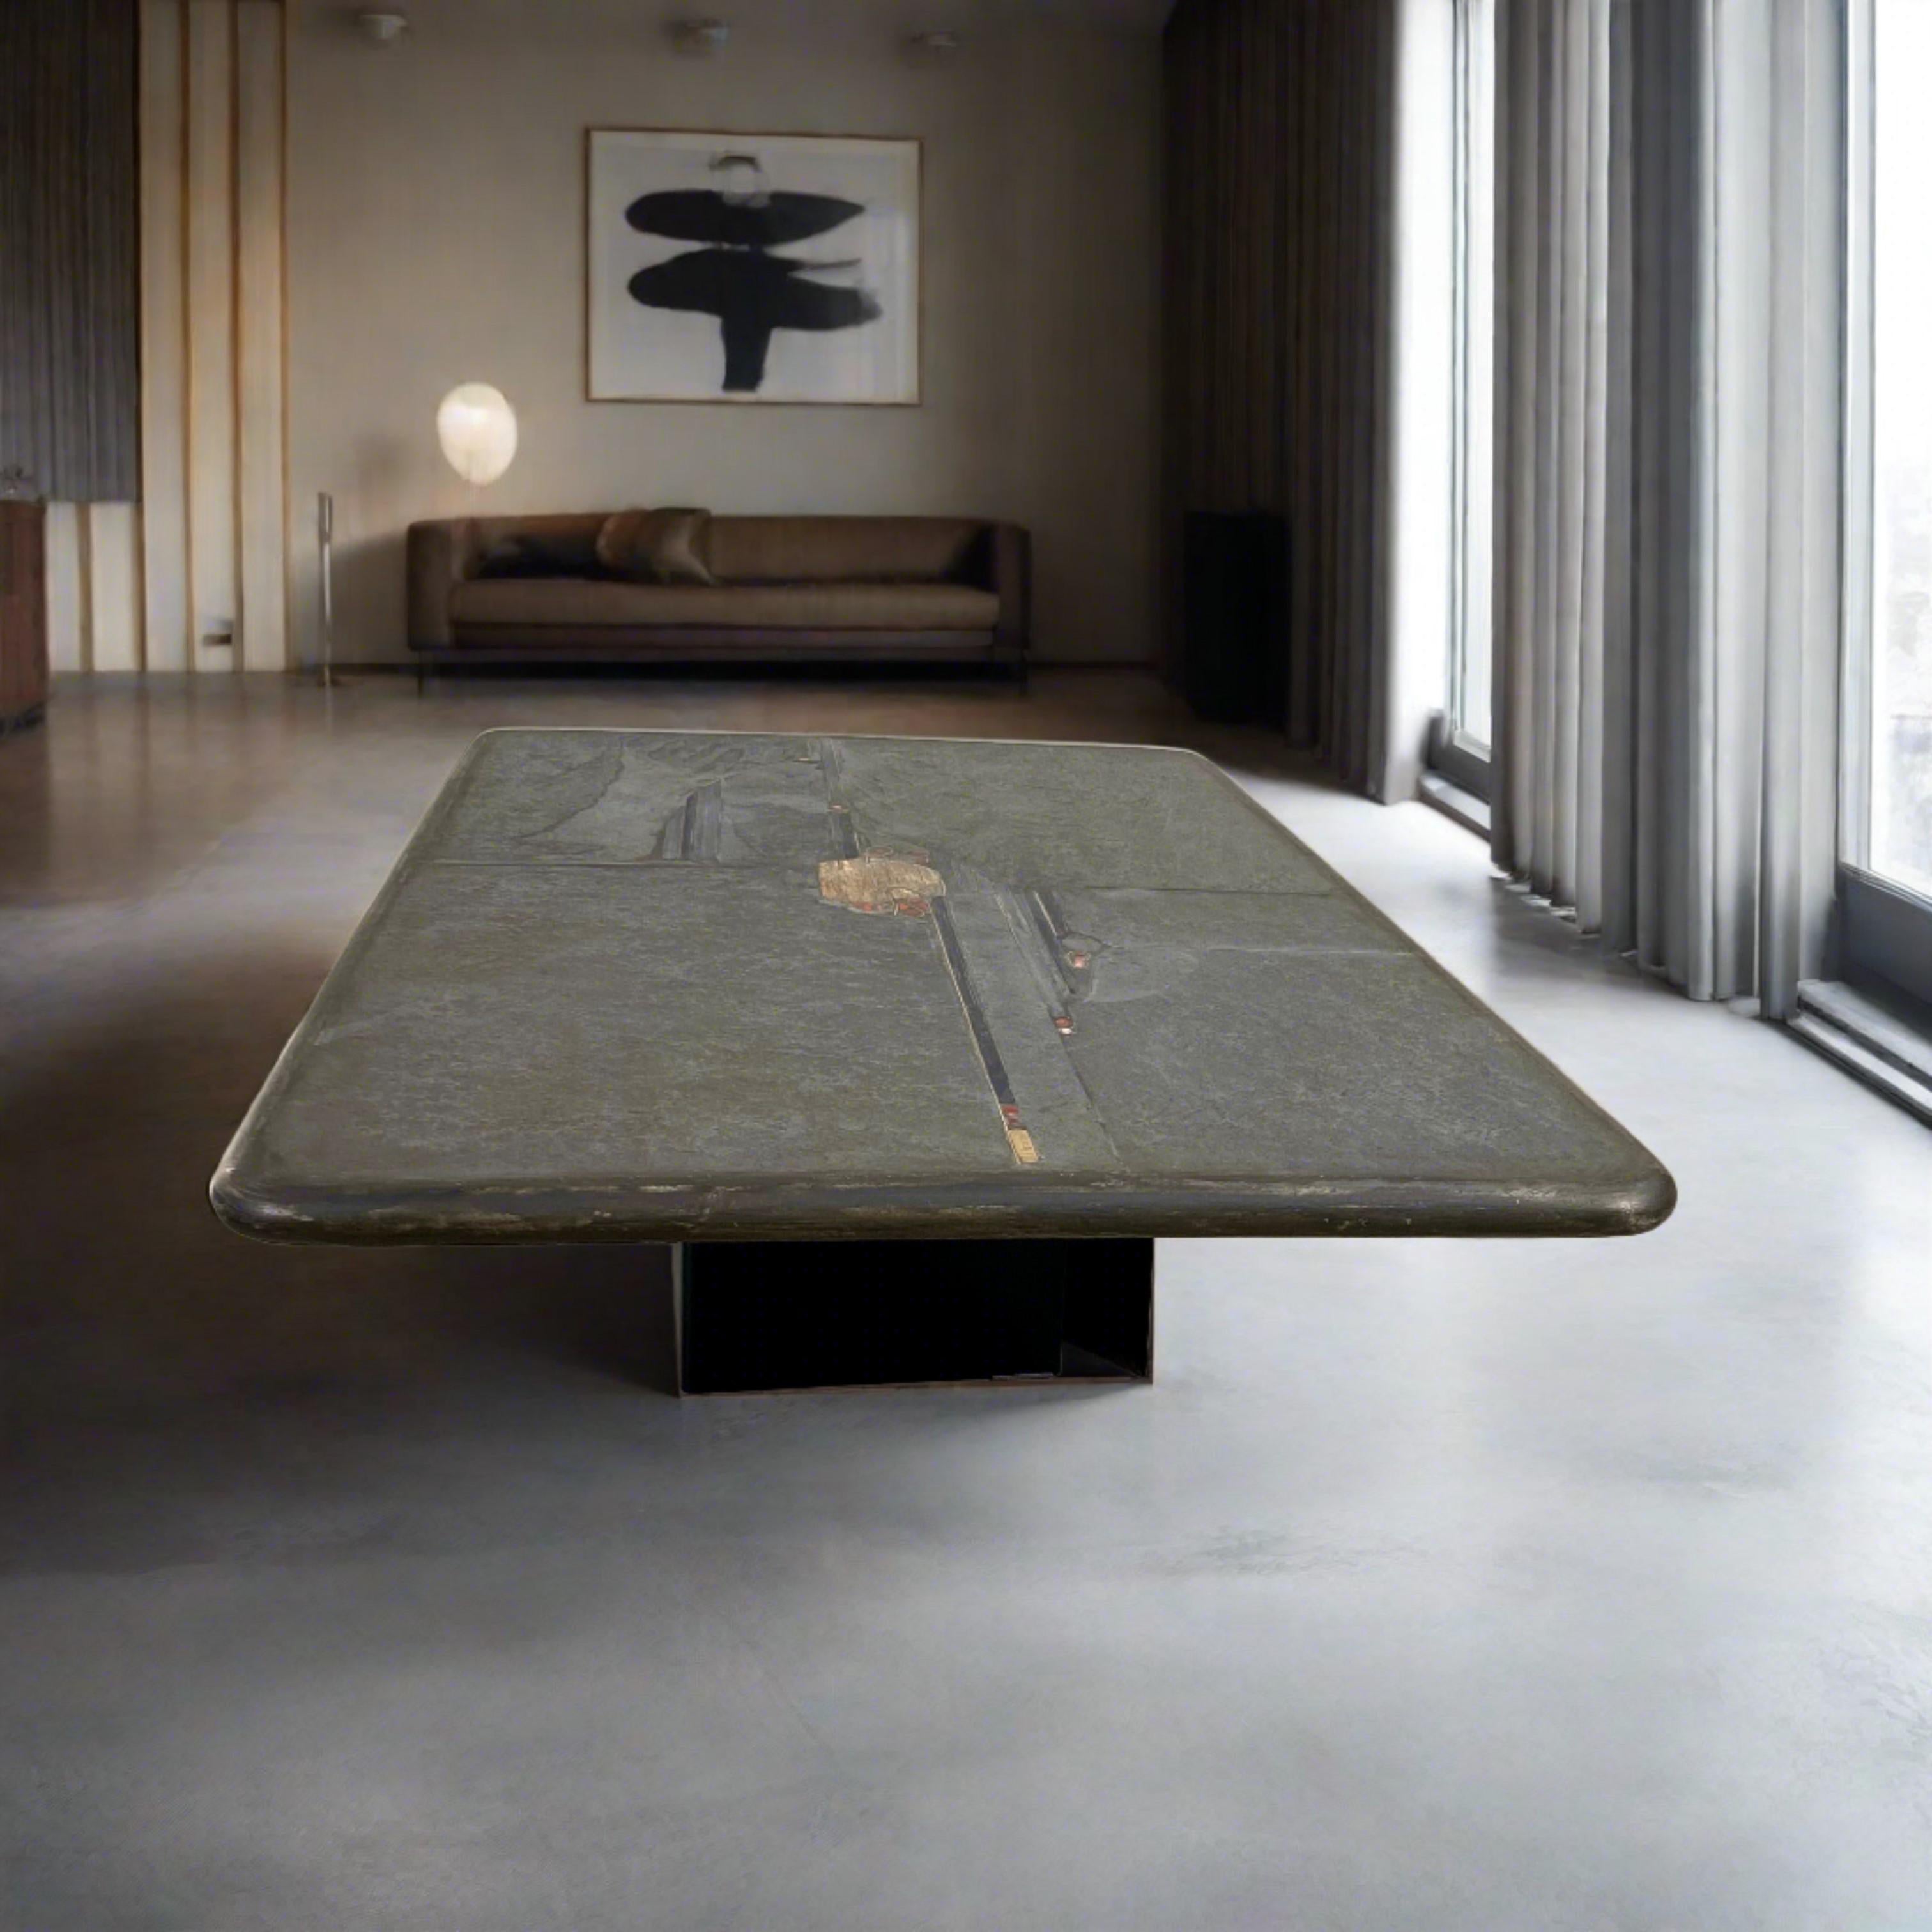 Brutalist coffee table designed and made by sculpter Paul Kingma († 2013), The Netherlands 1996

Introducing the Brutalist Round Coffee Table by renowned sculptor Paul Kingma, crafted in the Netherlands in 1996. This iconic piece is a testament to